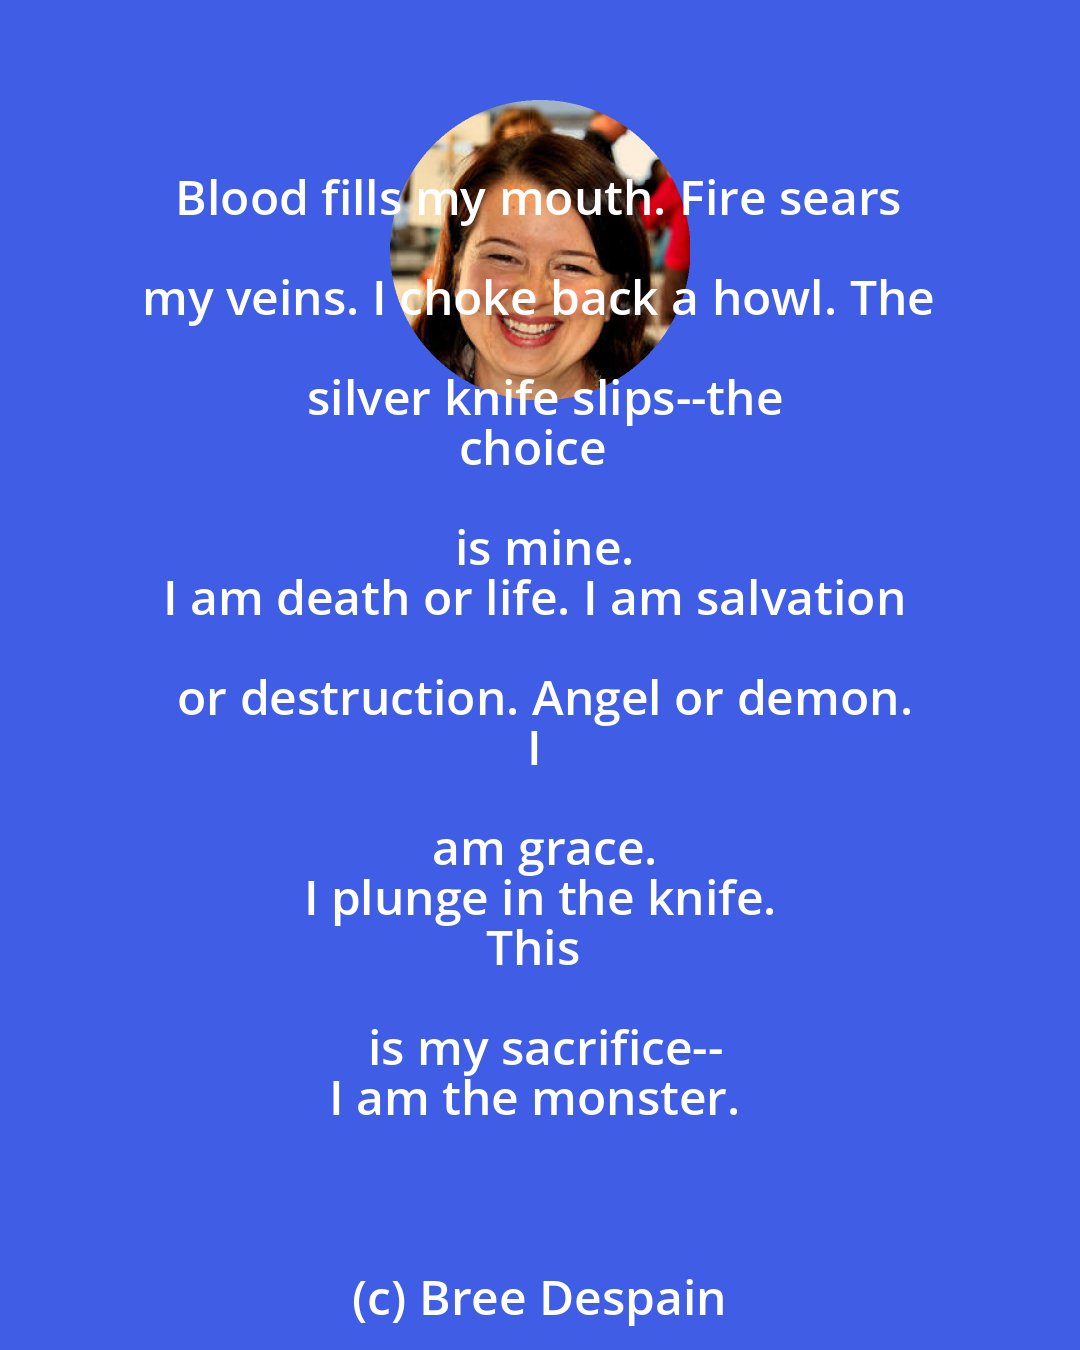 Bree Despain: Blood fills my mouth. Fire sears my veins. I choke back a howl. The silver knife slips--the
choice is mine.
I am death or life. I am salvation or destruction. Angel or demon.
I am grace.
I plunge in the knife.
This is my sacrifice--
I am the monster.